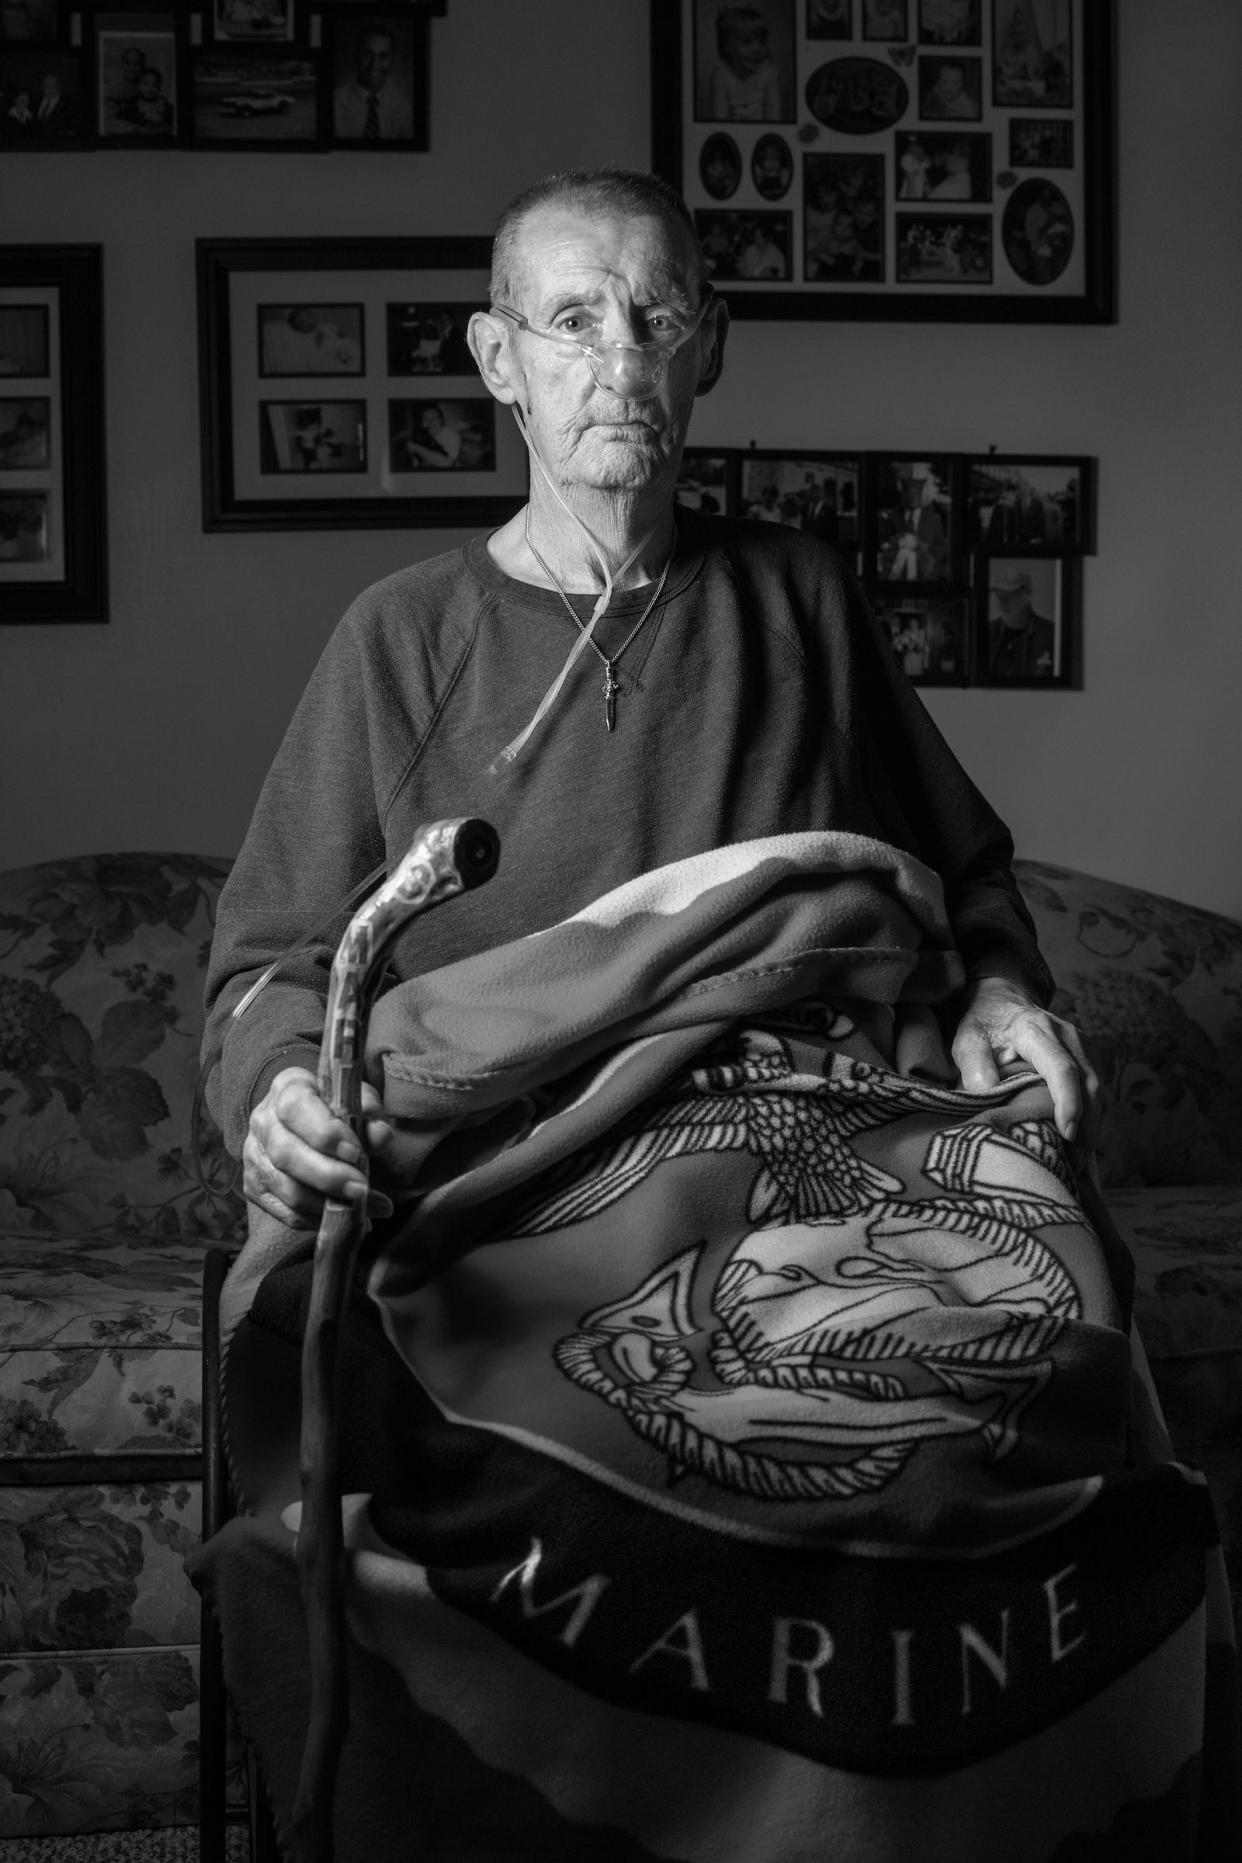 This portrait of Kenneth Hunter is being displayed in The Last Portrait, an exhibition of photographs by local photographer Mark DiOrio of people with terminal illnesses under the care of Hospice & Palliative Care, Inc. of New Hartford. The exhibition is at The Other Side, 2011 Genesee St. in Utica, from the evening of Feb. 9 through March 2.